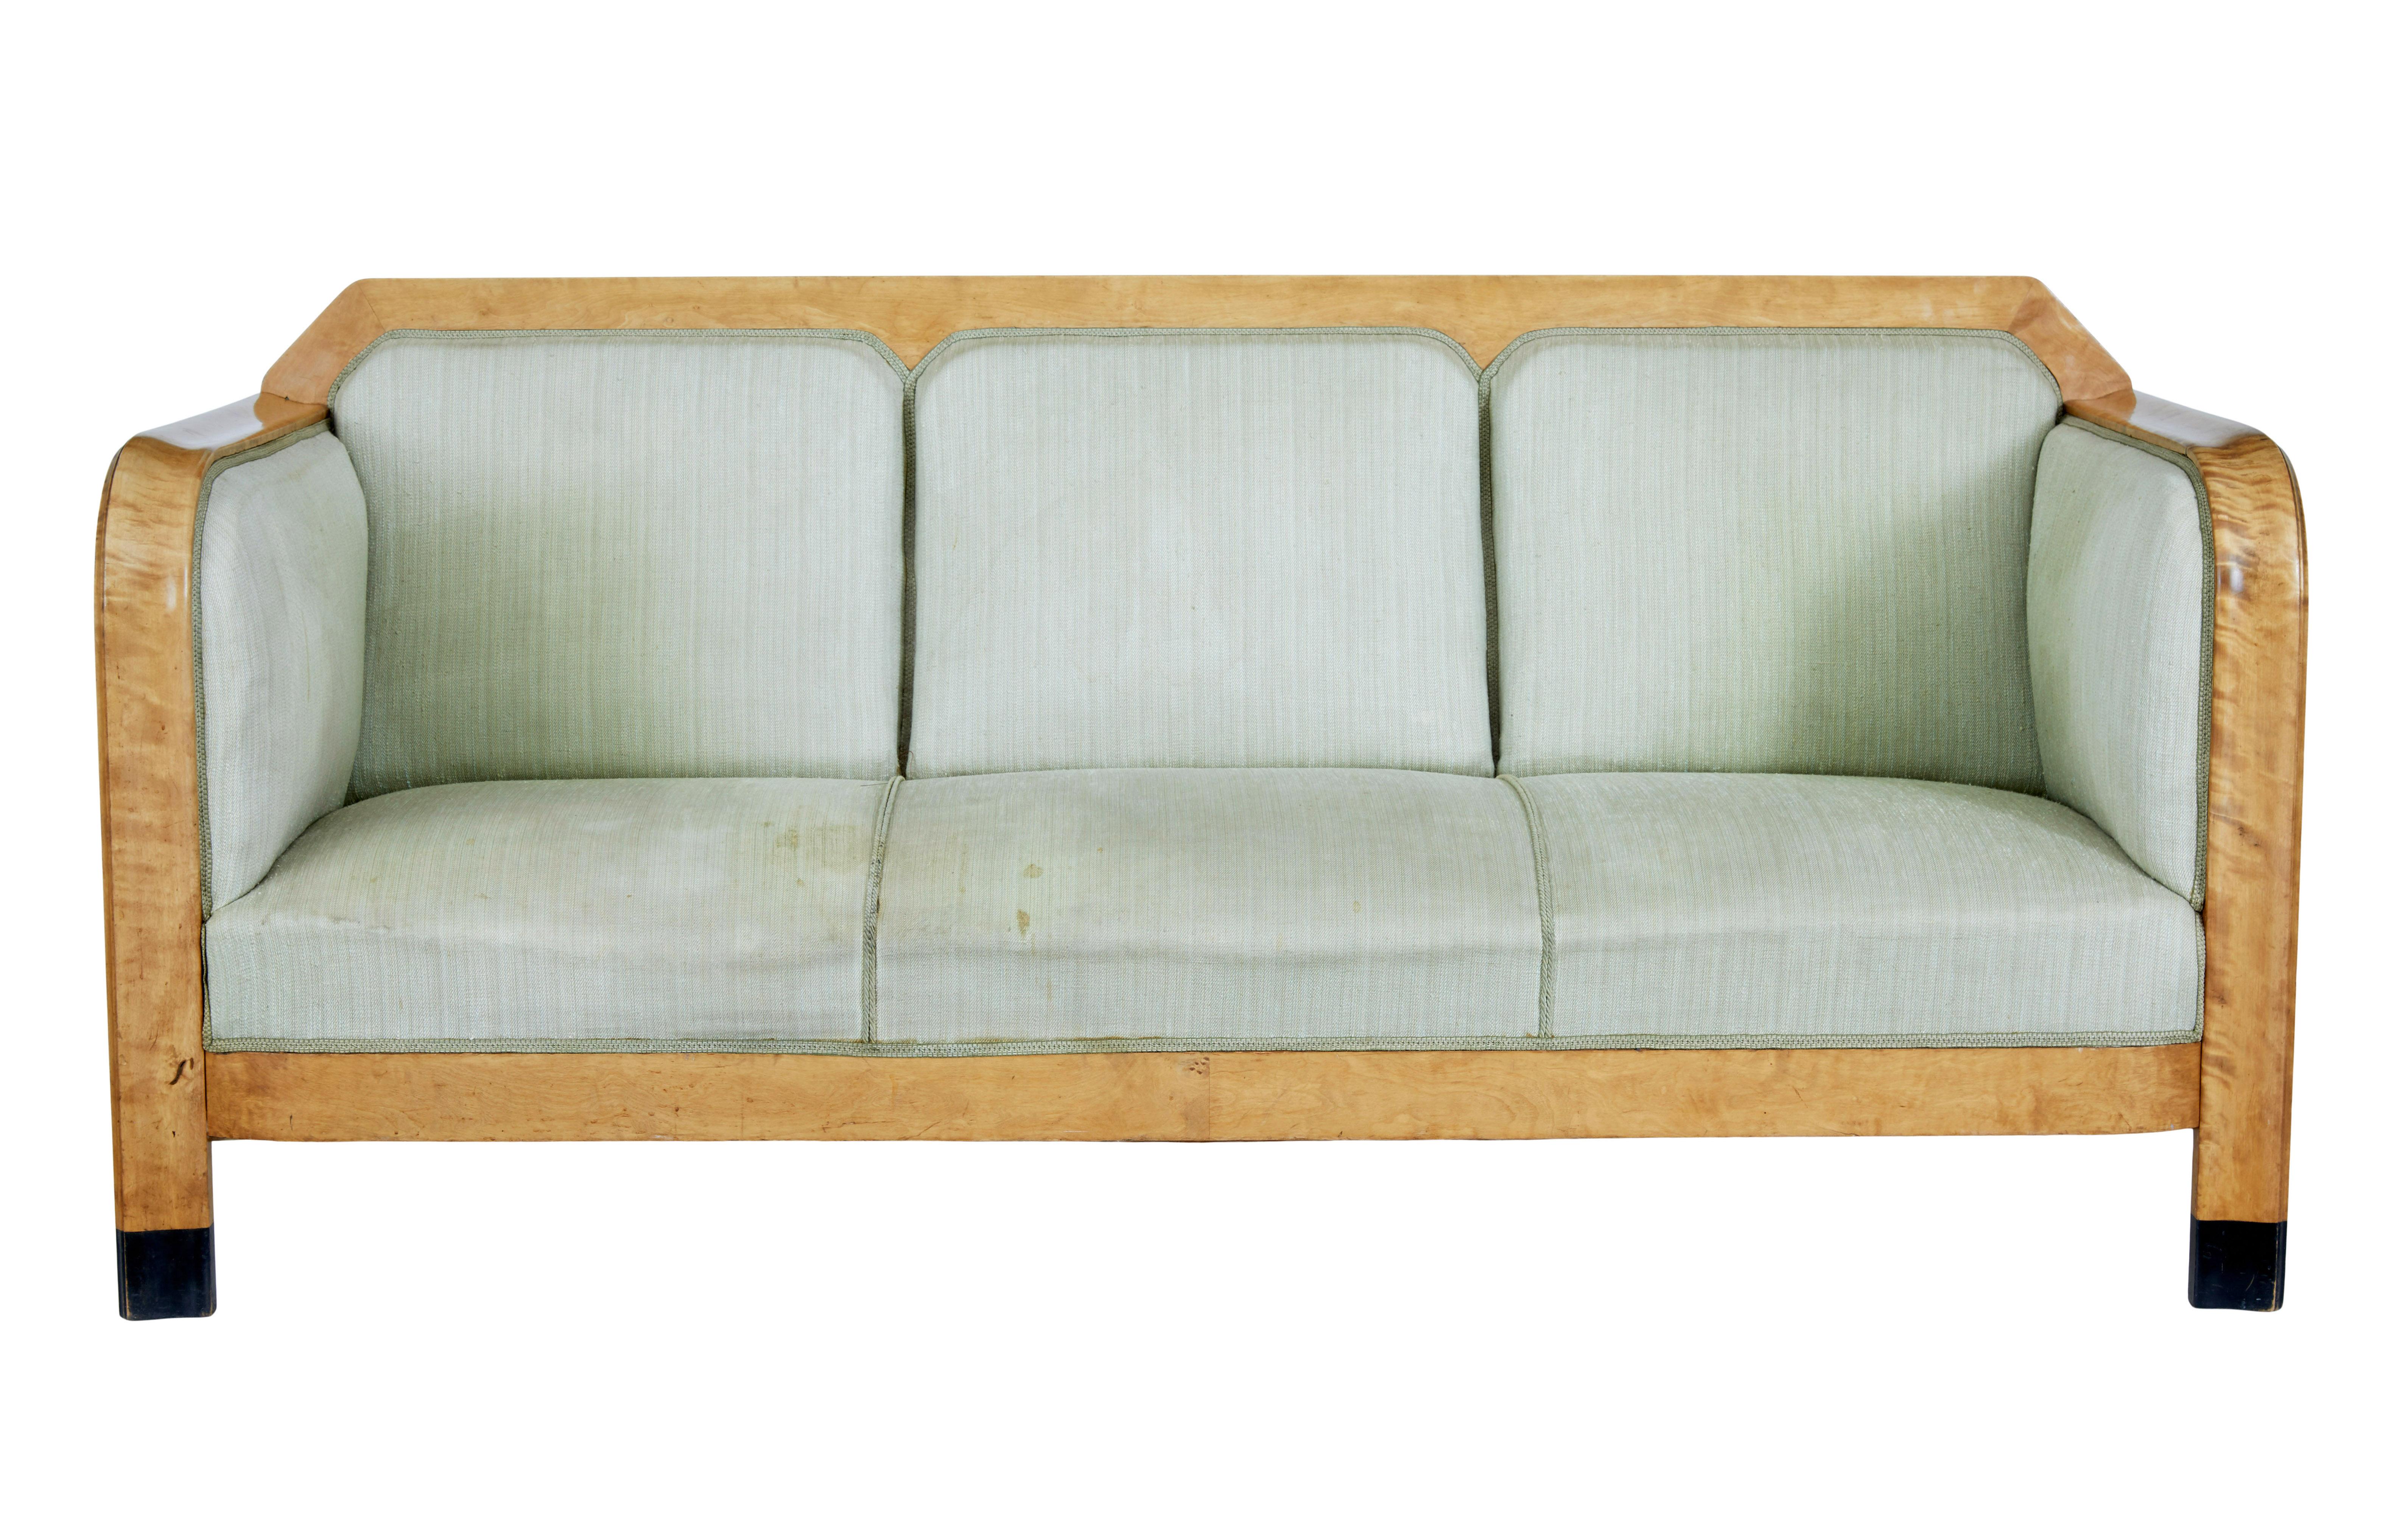 Early 20th century Swedish birch sofa circa 1900.

Large proportioned comfortable 3 seater sofa.  Flowing arms with straight solid sides.  Upholstery shaped to form 3 seats.  Ebonised tips to from legs.

Very comfortable sofa, which is need of